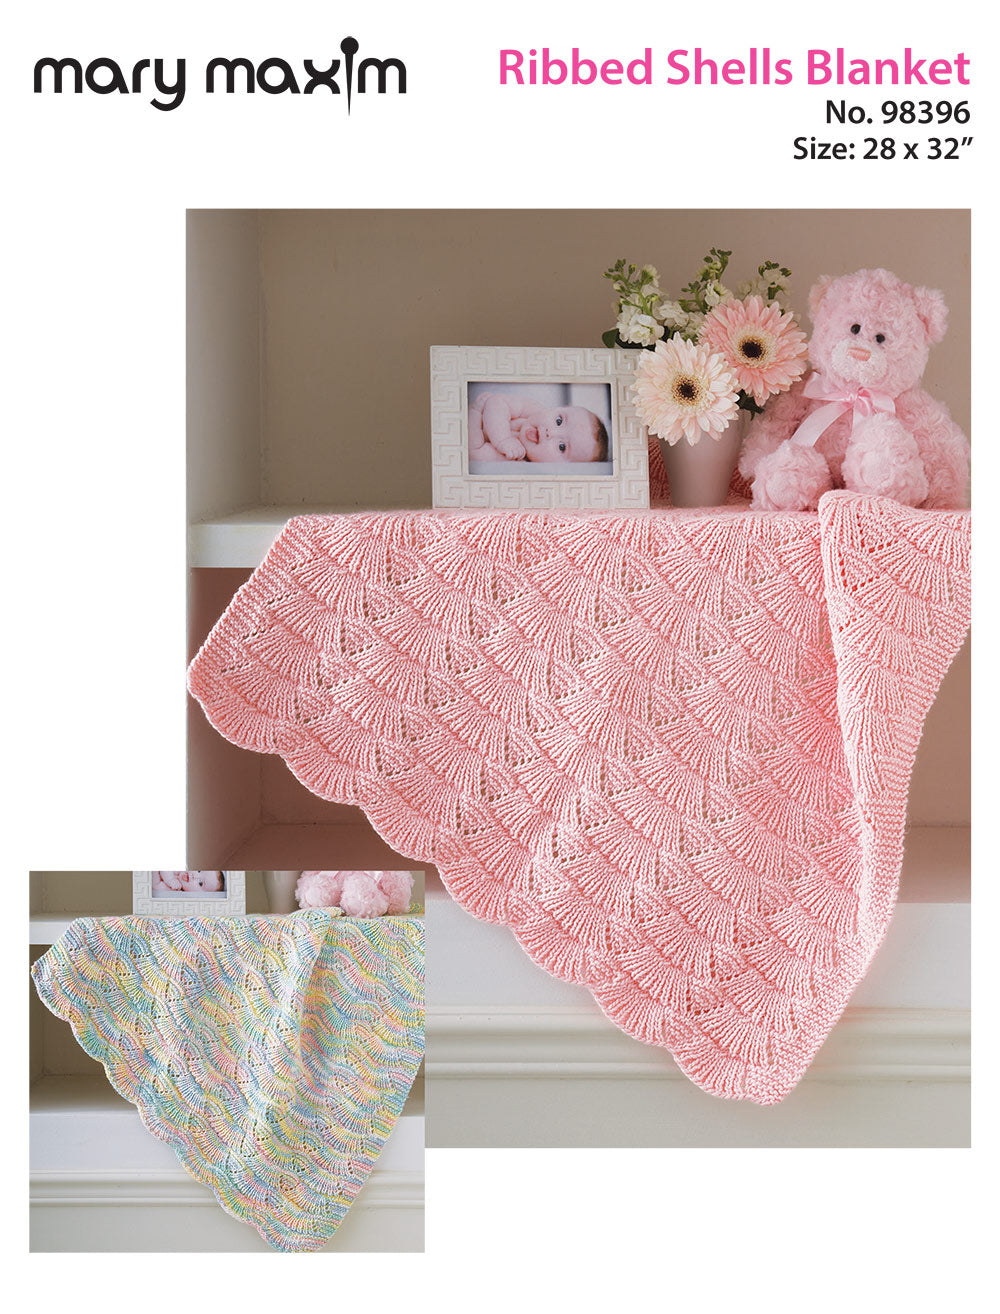 Free Ribbed Shell Blanket Pattern